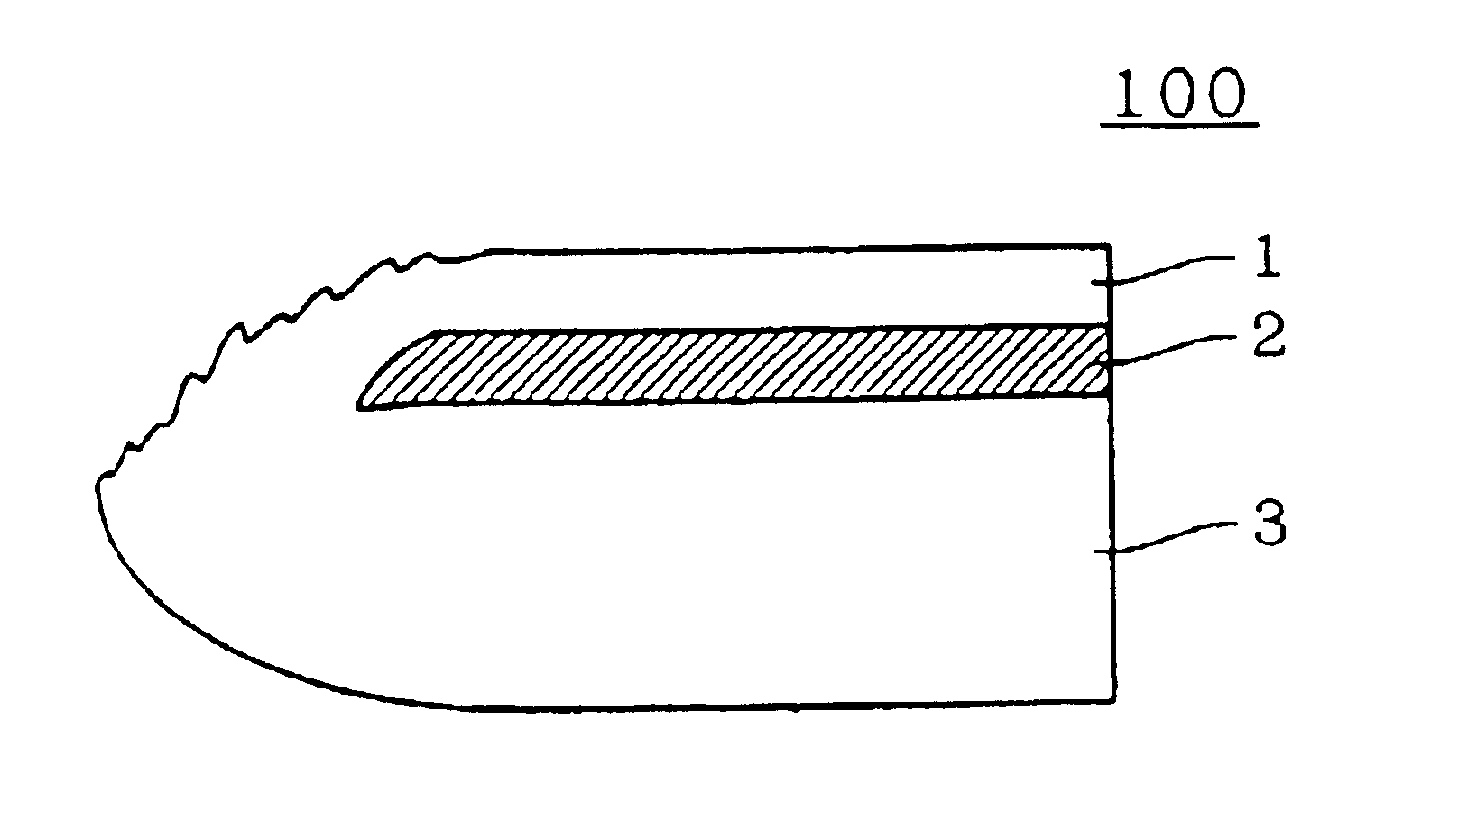 Semiconductor substrate with stacked oxide and SOI layers with a molten or epitaxial layer formed on an edge of the stacked layers